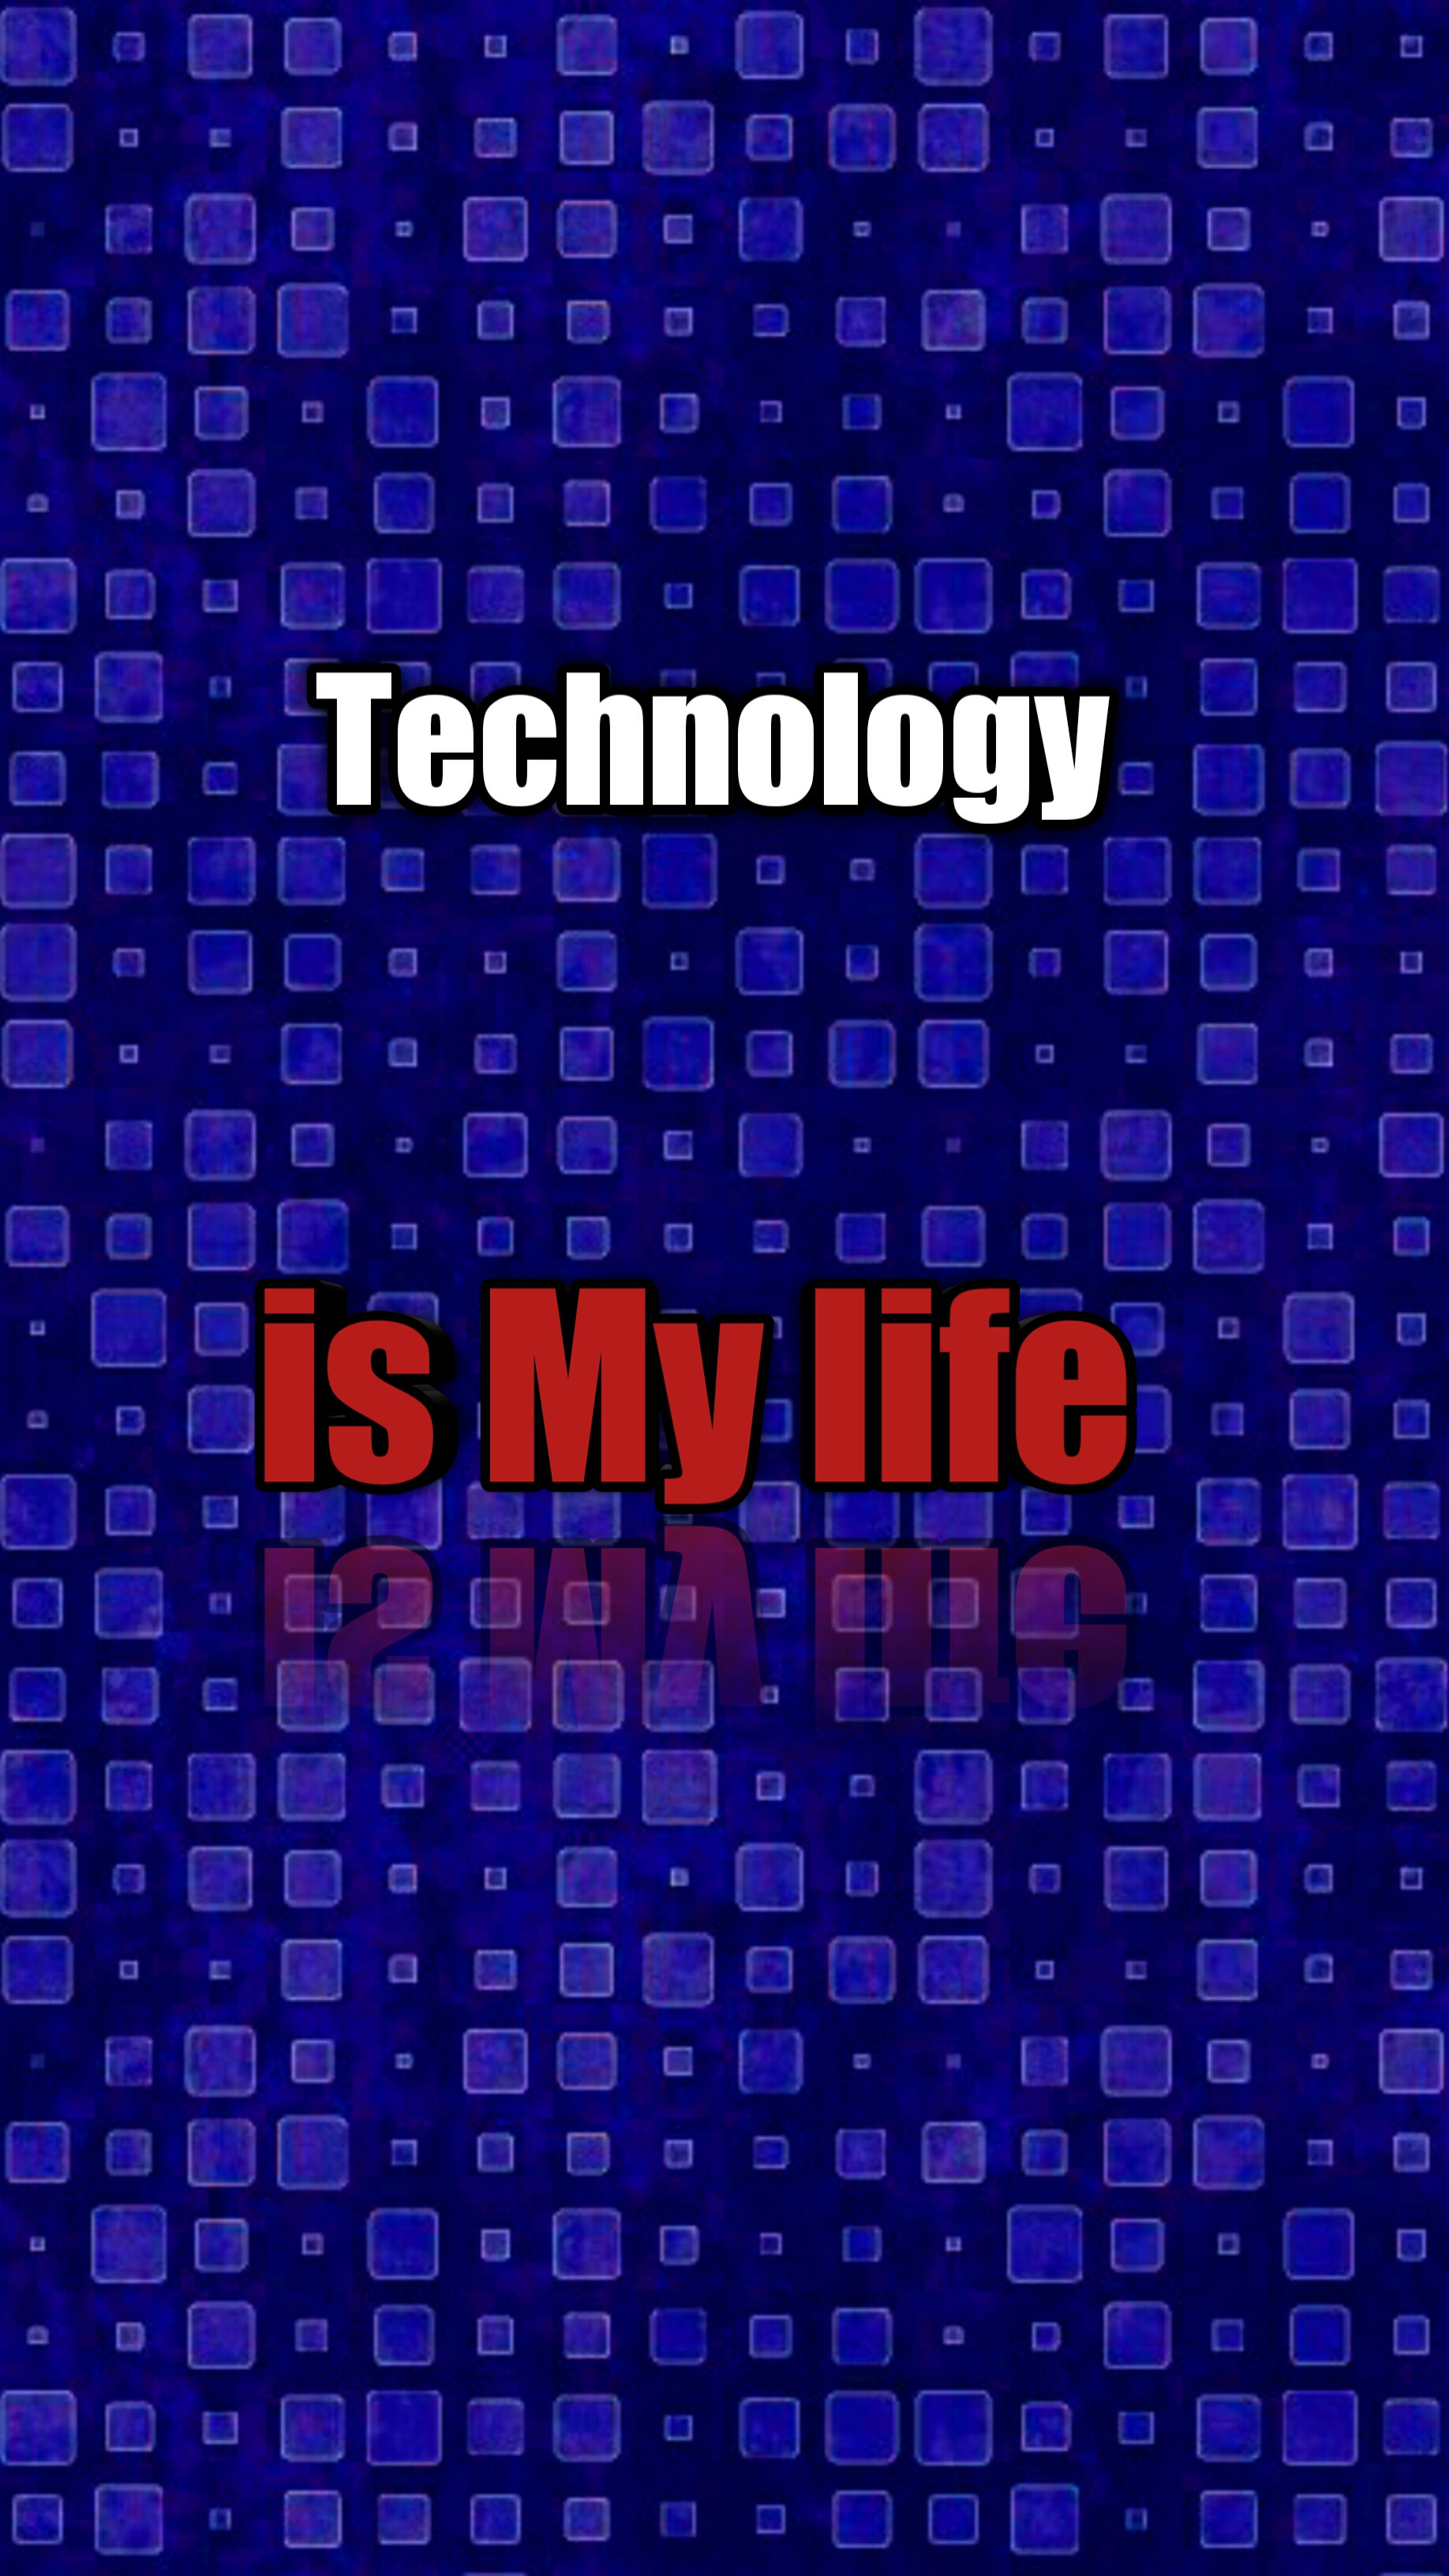 Technology is my life